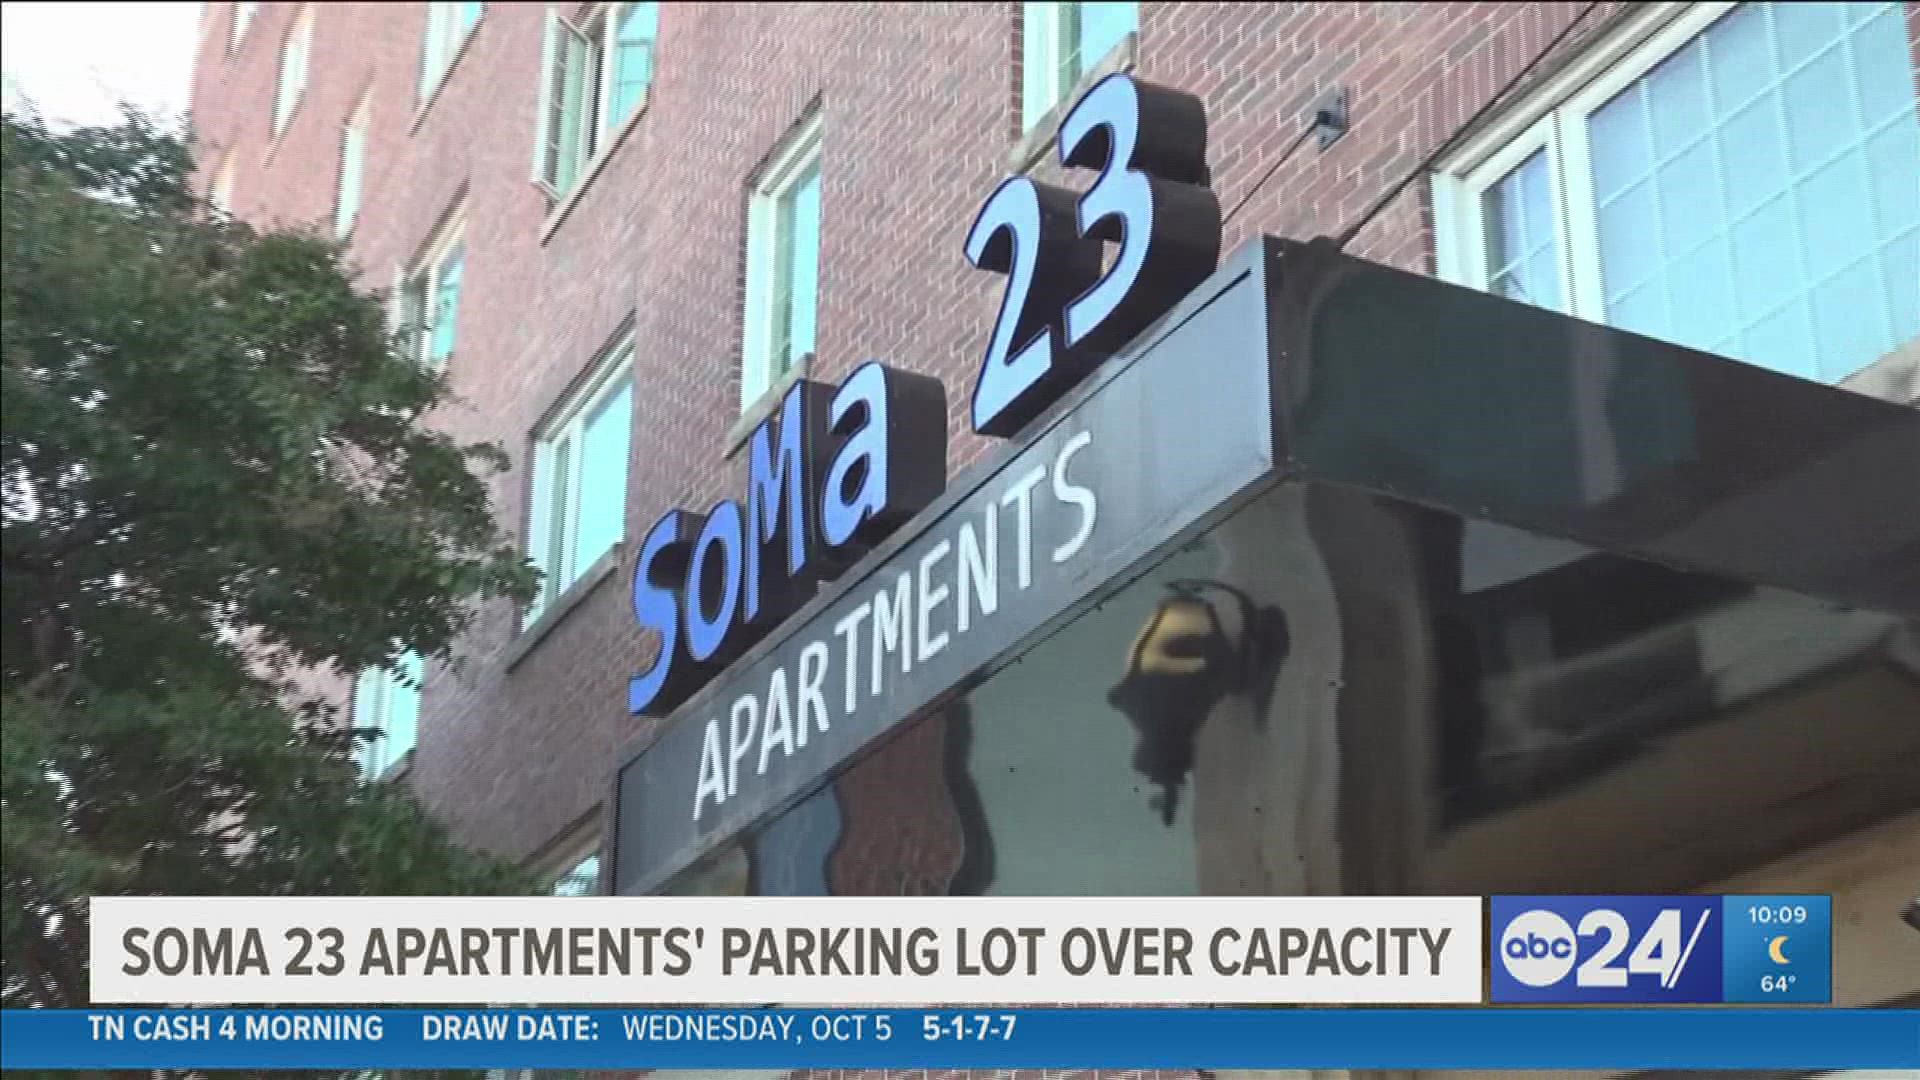 Residents at SoMa 23 Apartments say the building's parking lot is over capacity and their frustration is growing.